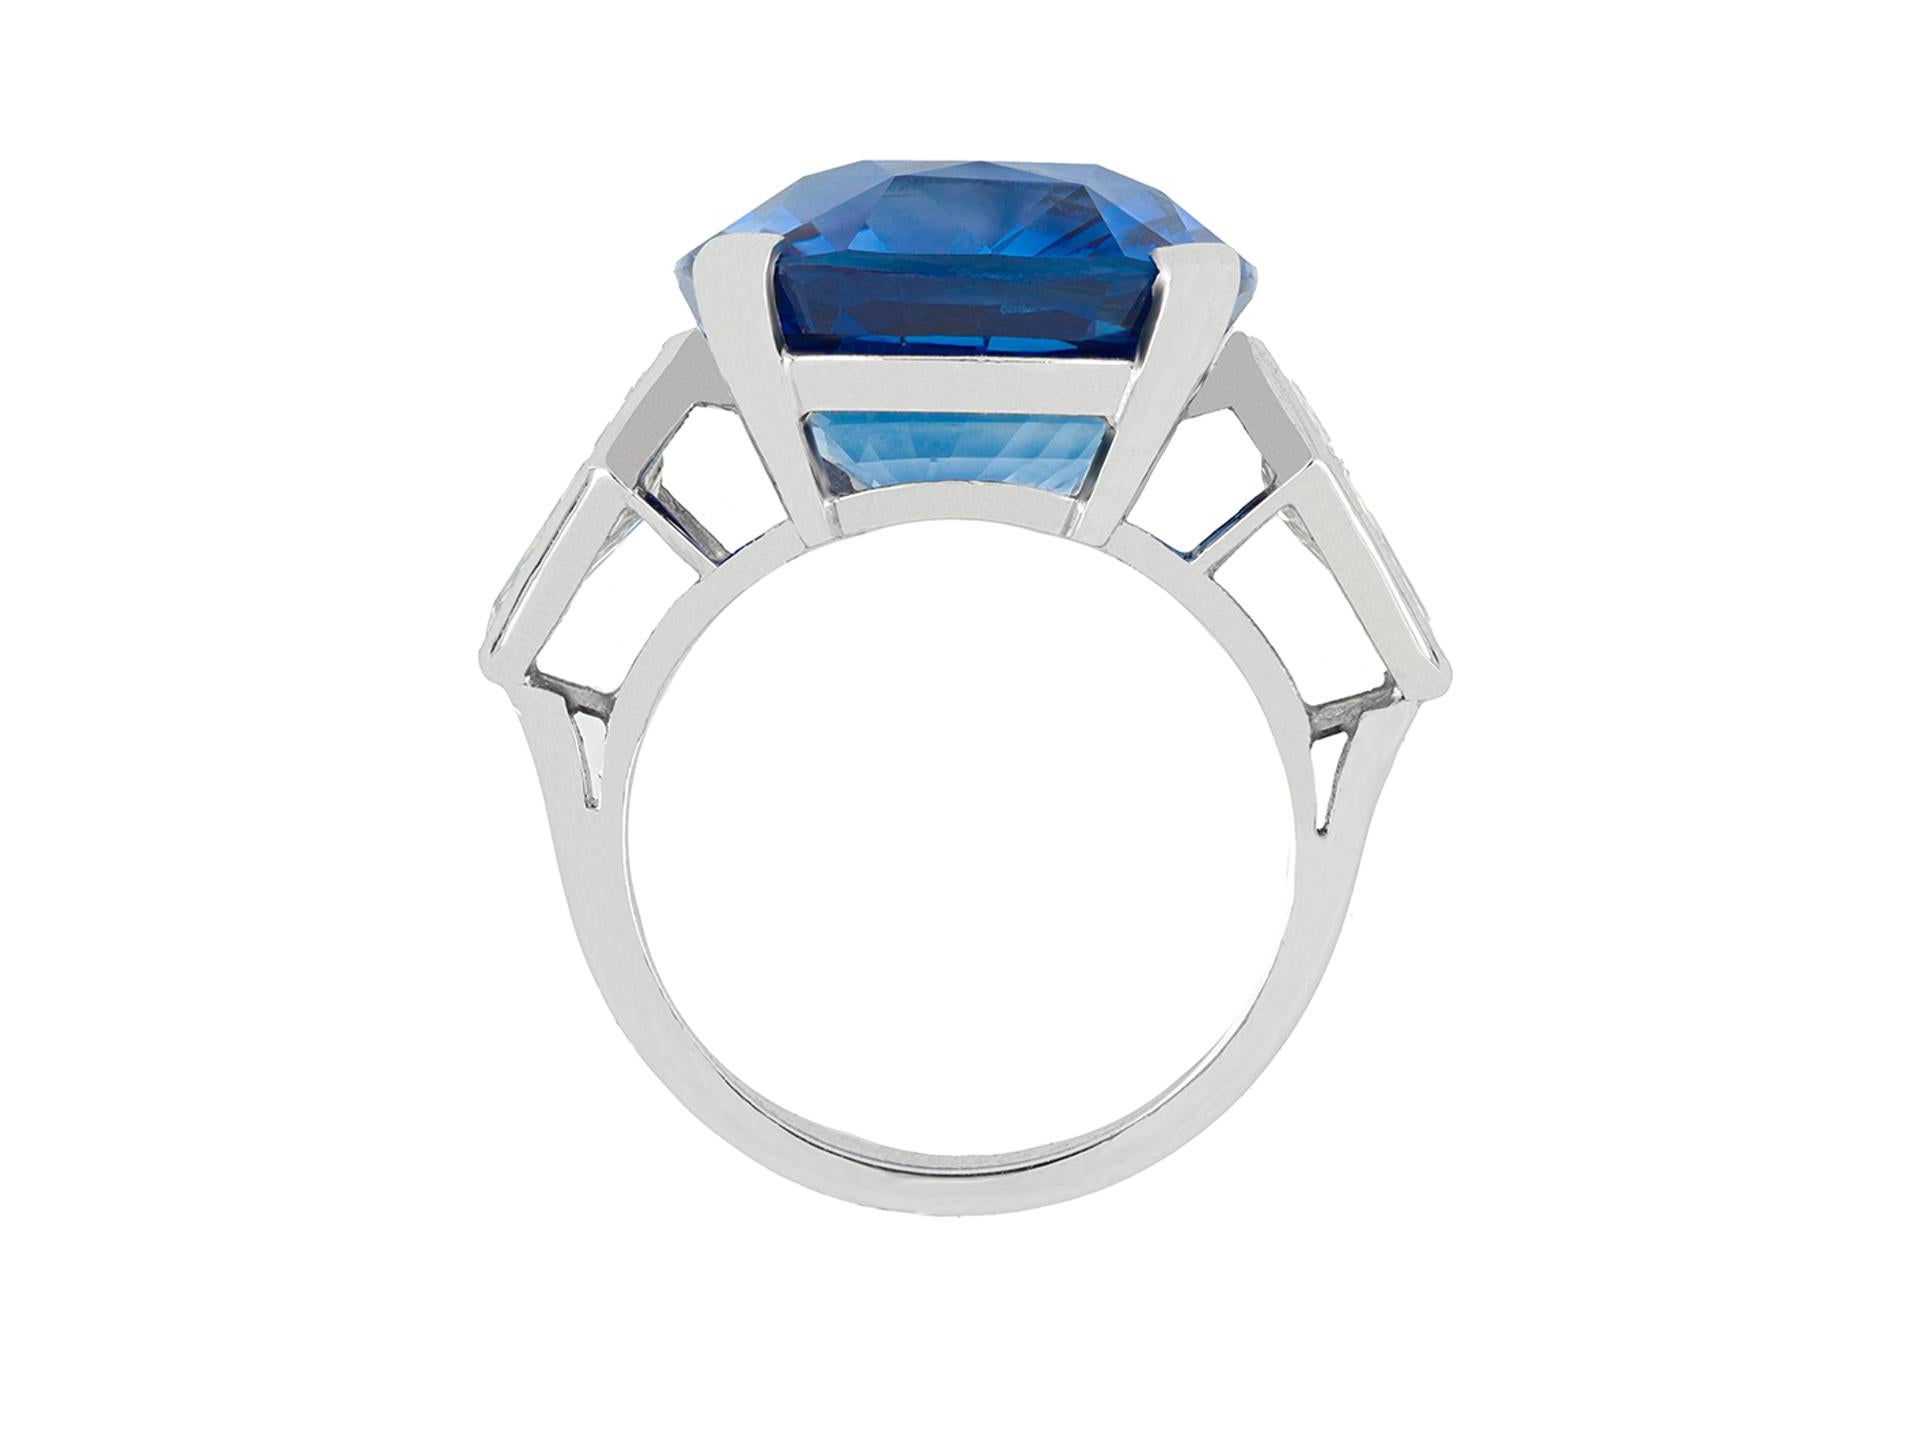 Natural Ceylon sapphire and diamond ring. An important piece, set to centre with a cushion shape old cut natural unenhanced Ceylon sapphire in an open back four claw setting with an approximate weight of 20.13 carats, flanked by two kite shape old